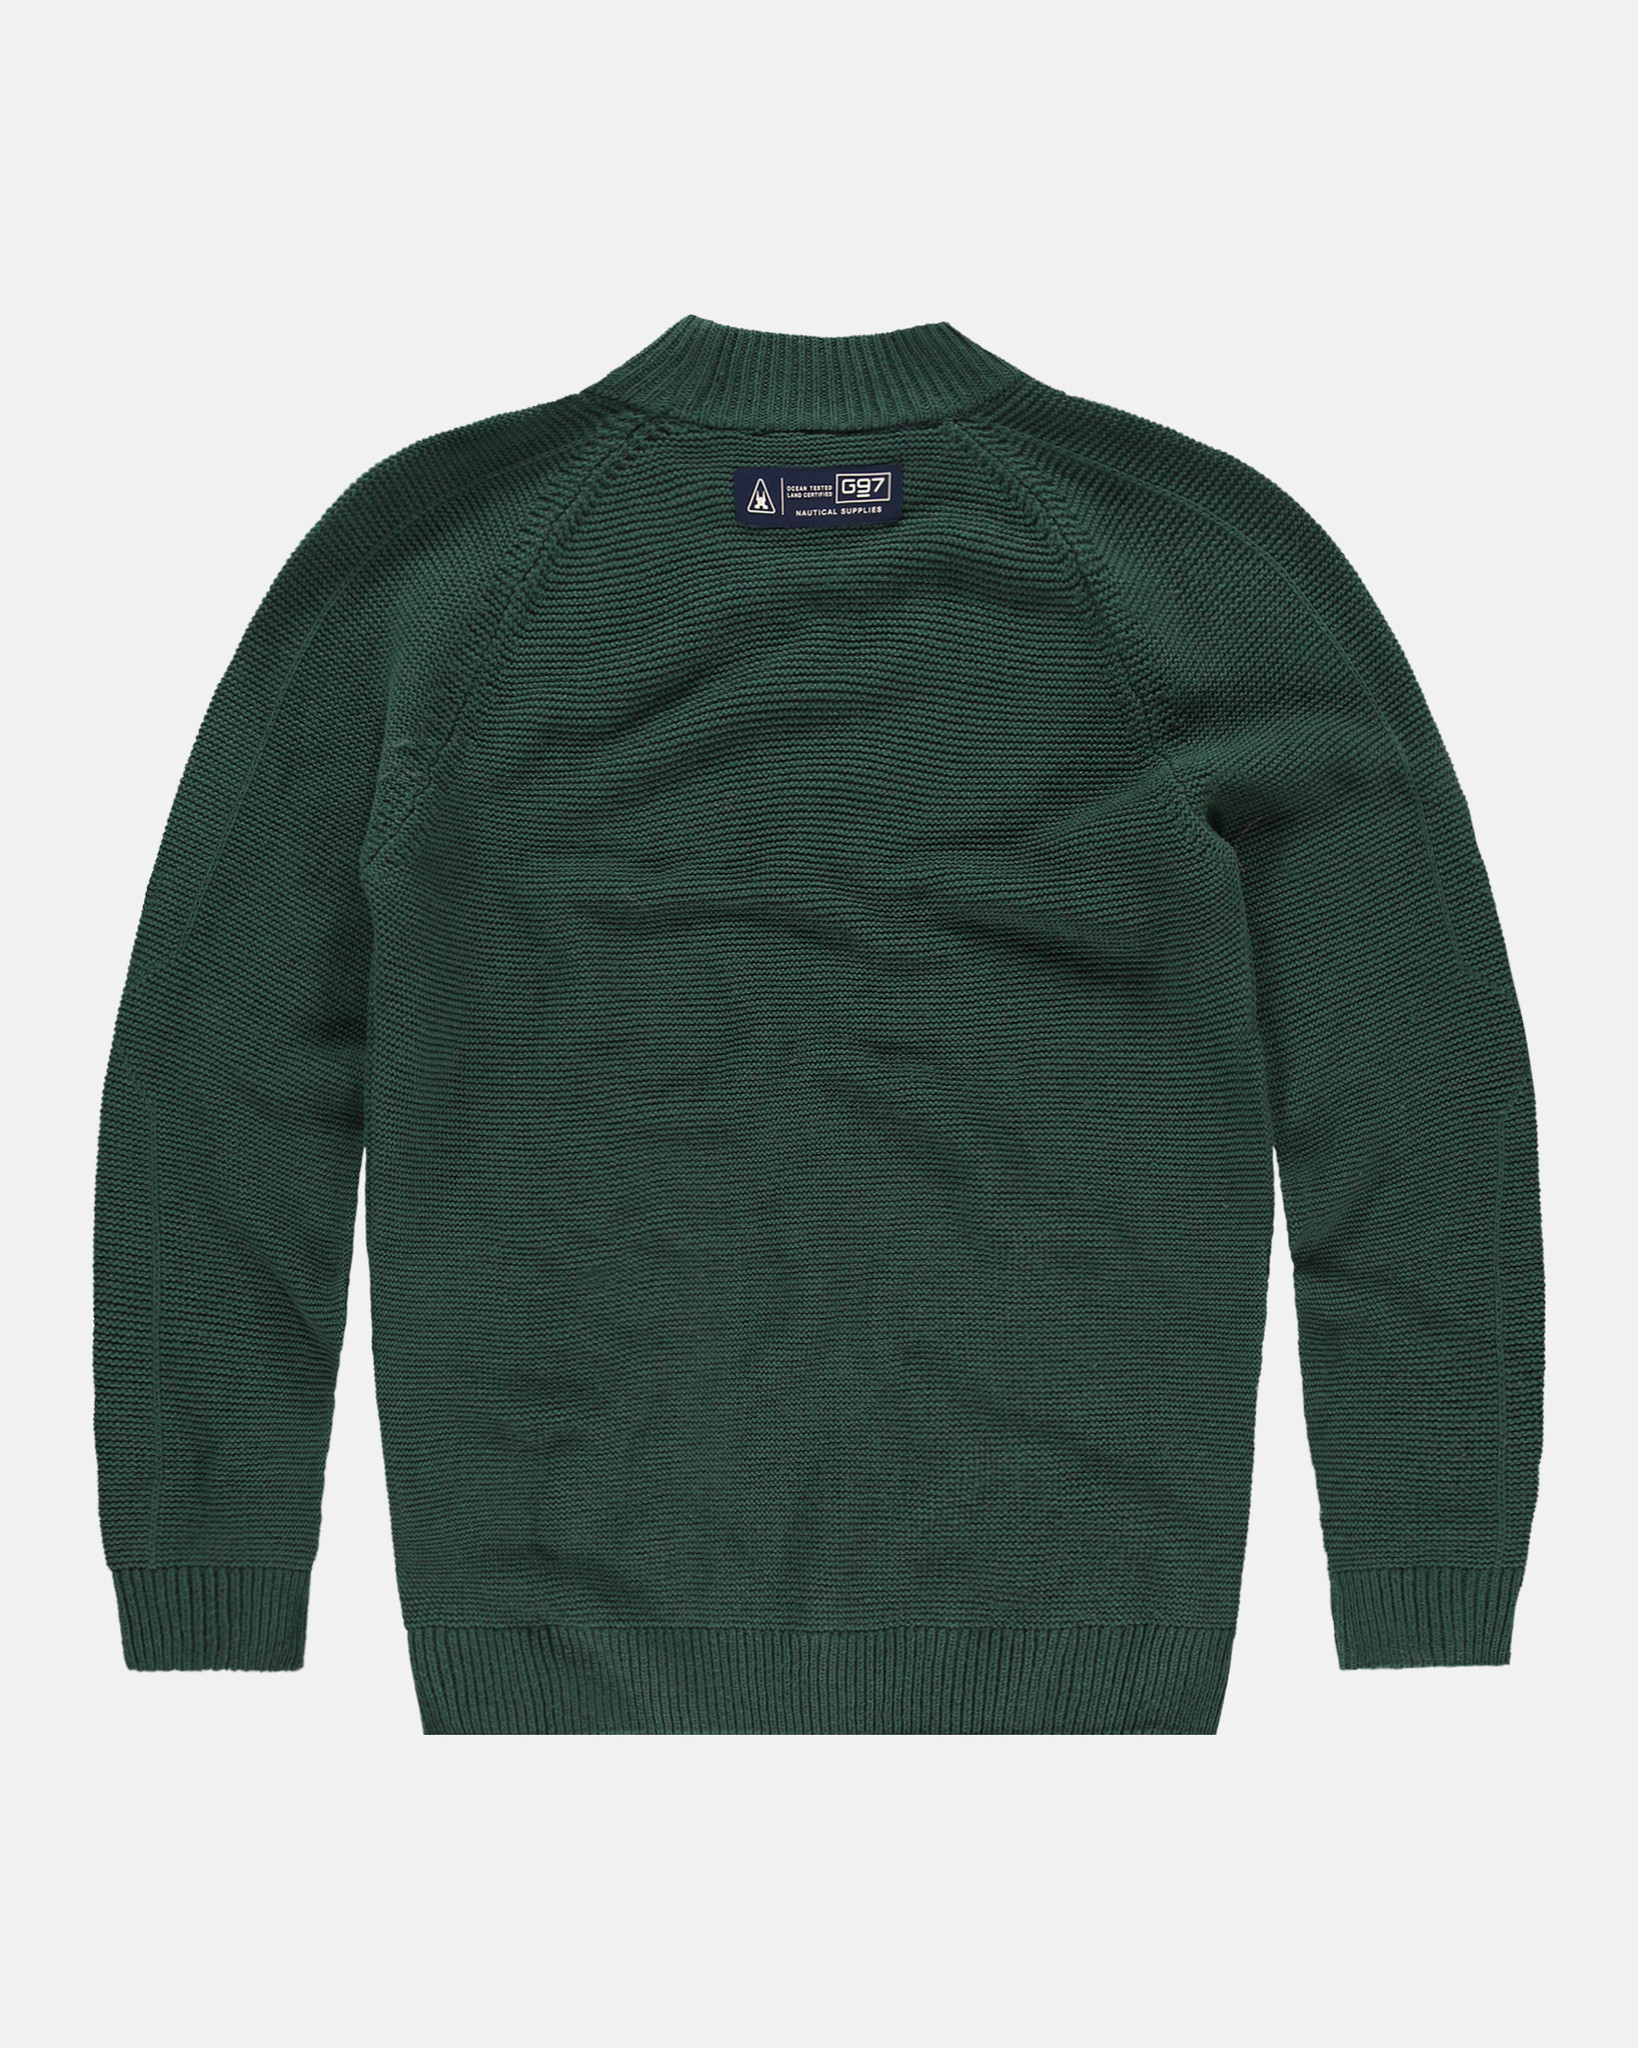 The Michael turtleneck pullover